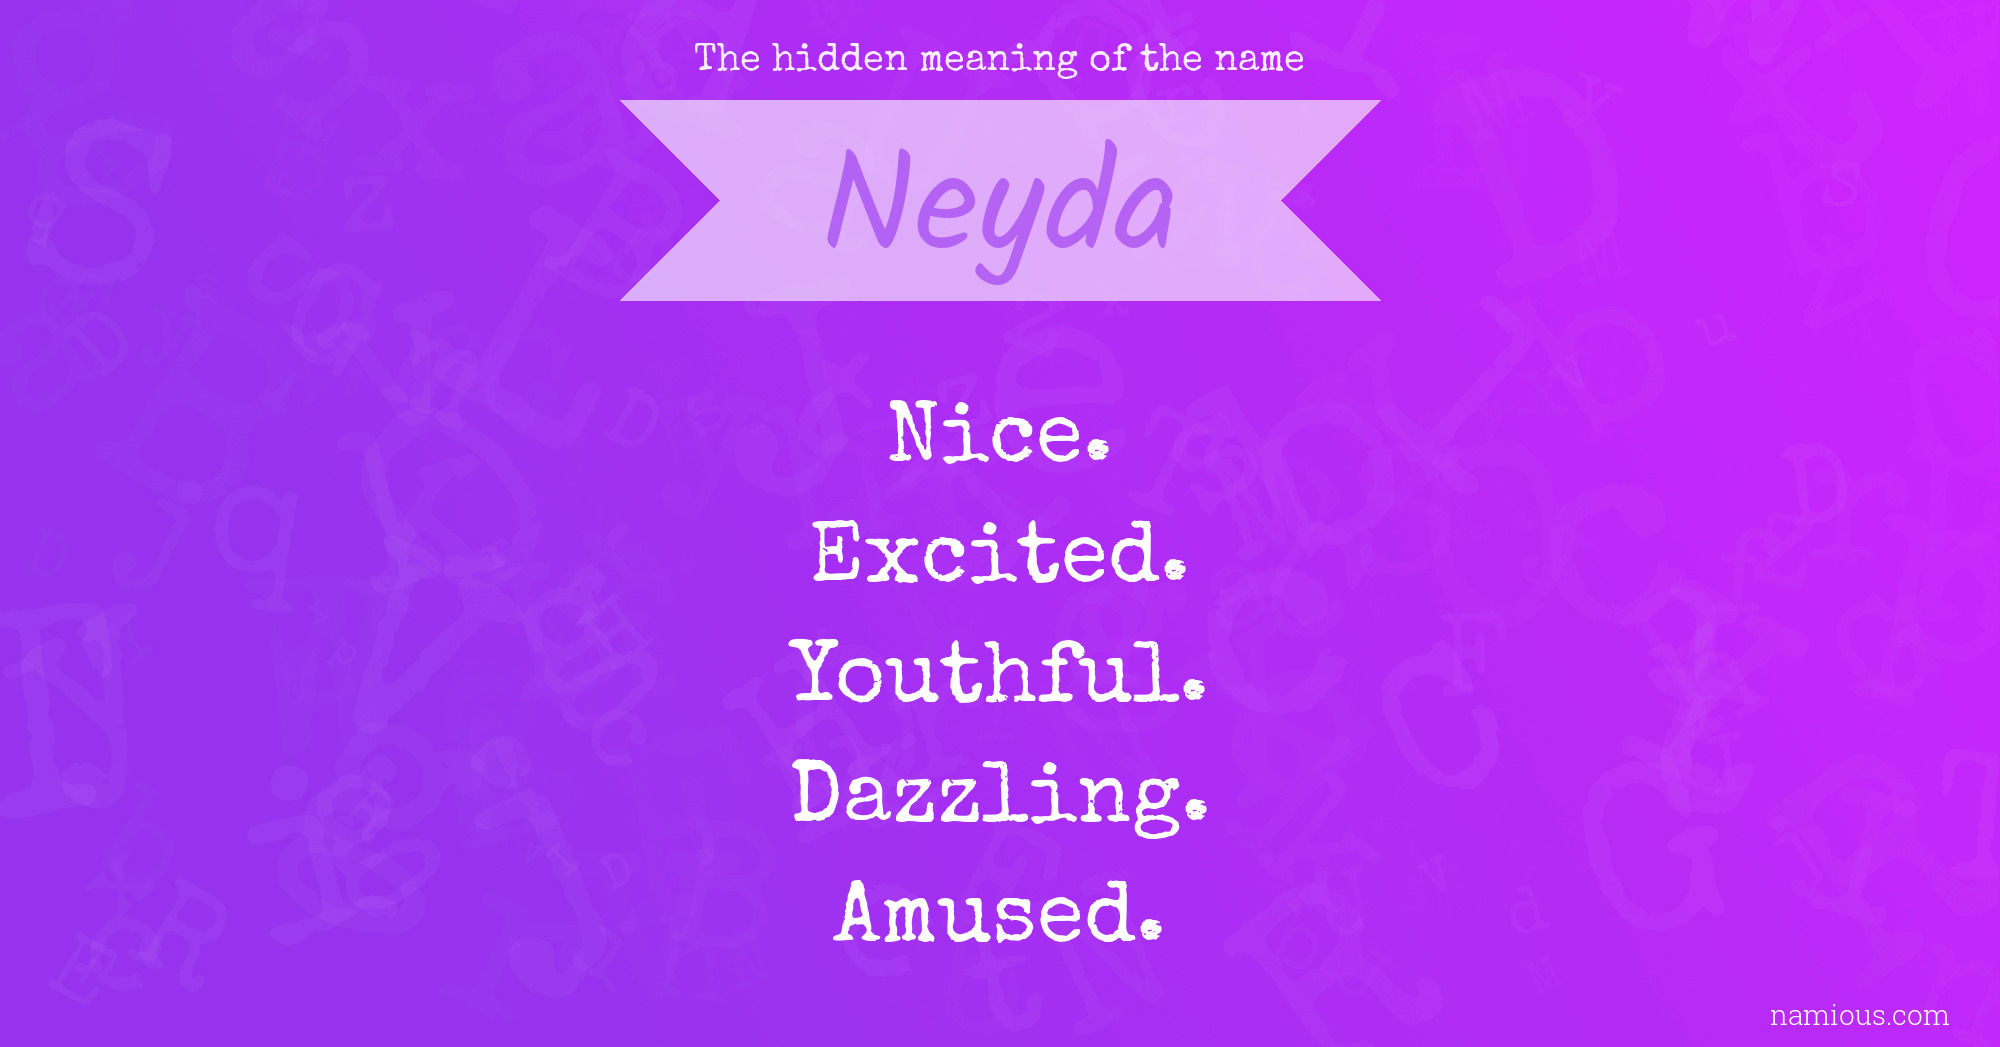 The hidden meaning of the name Neyda